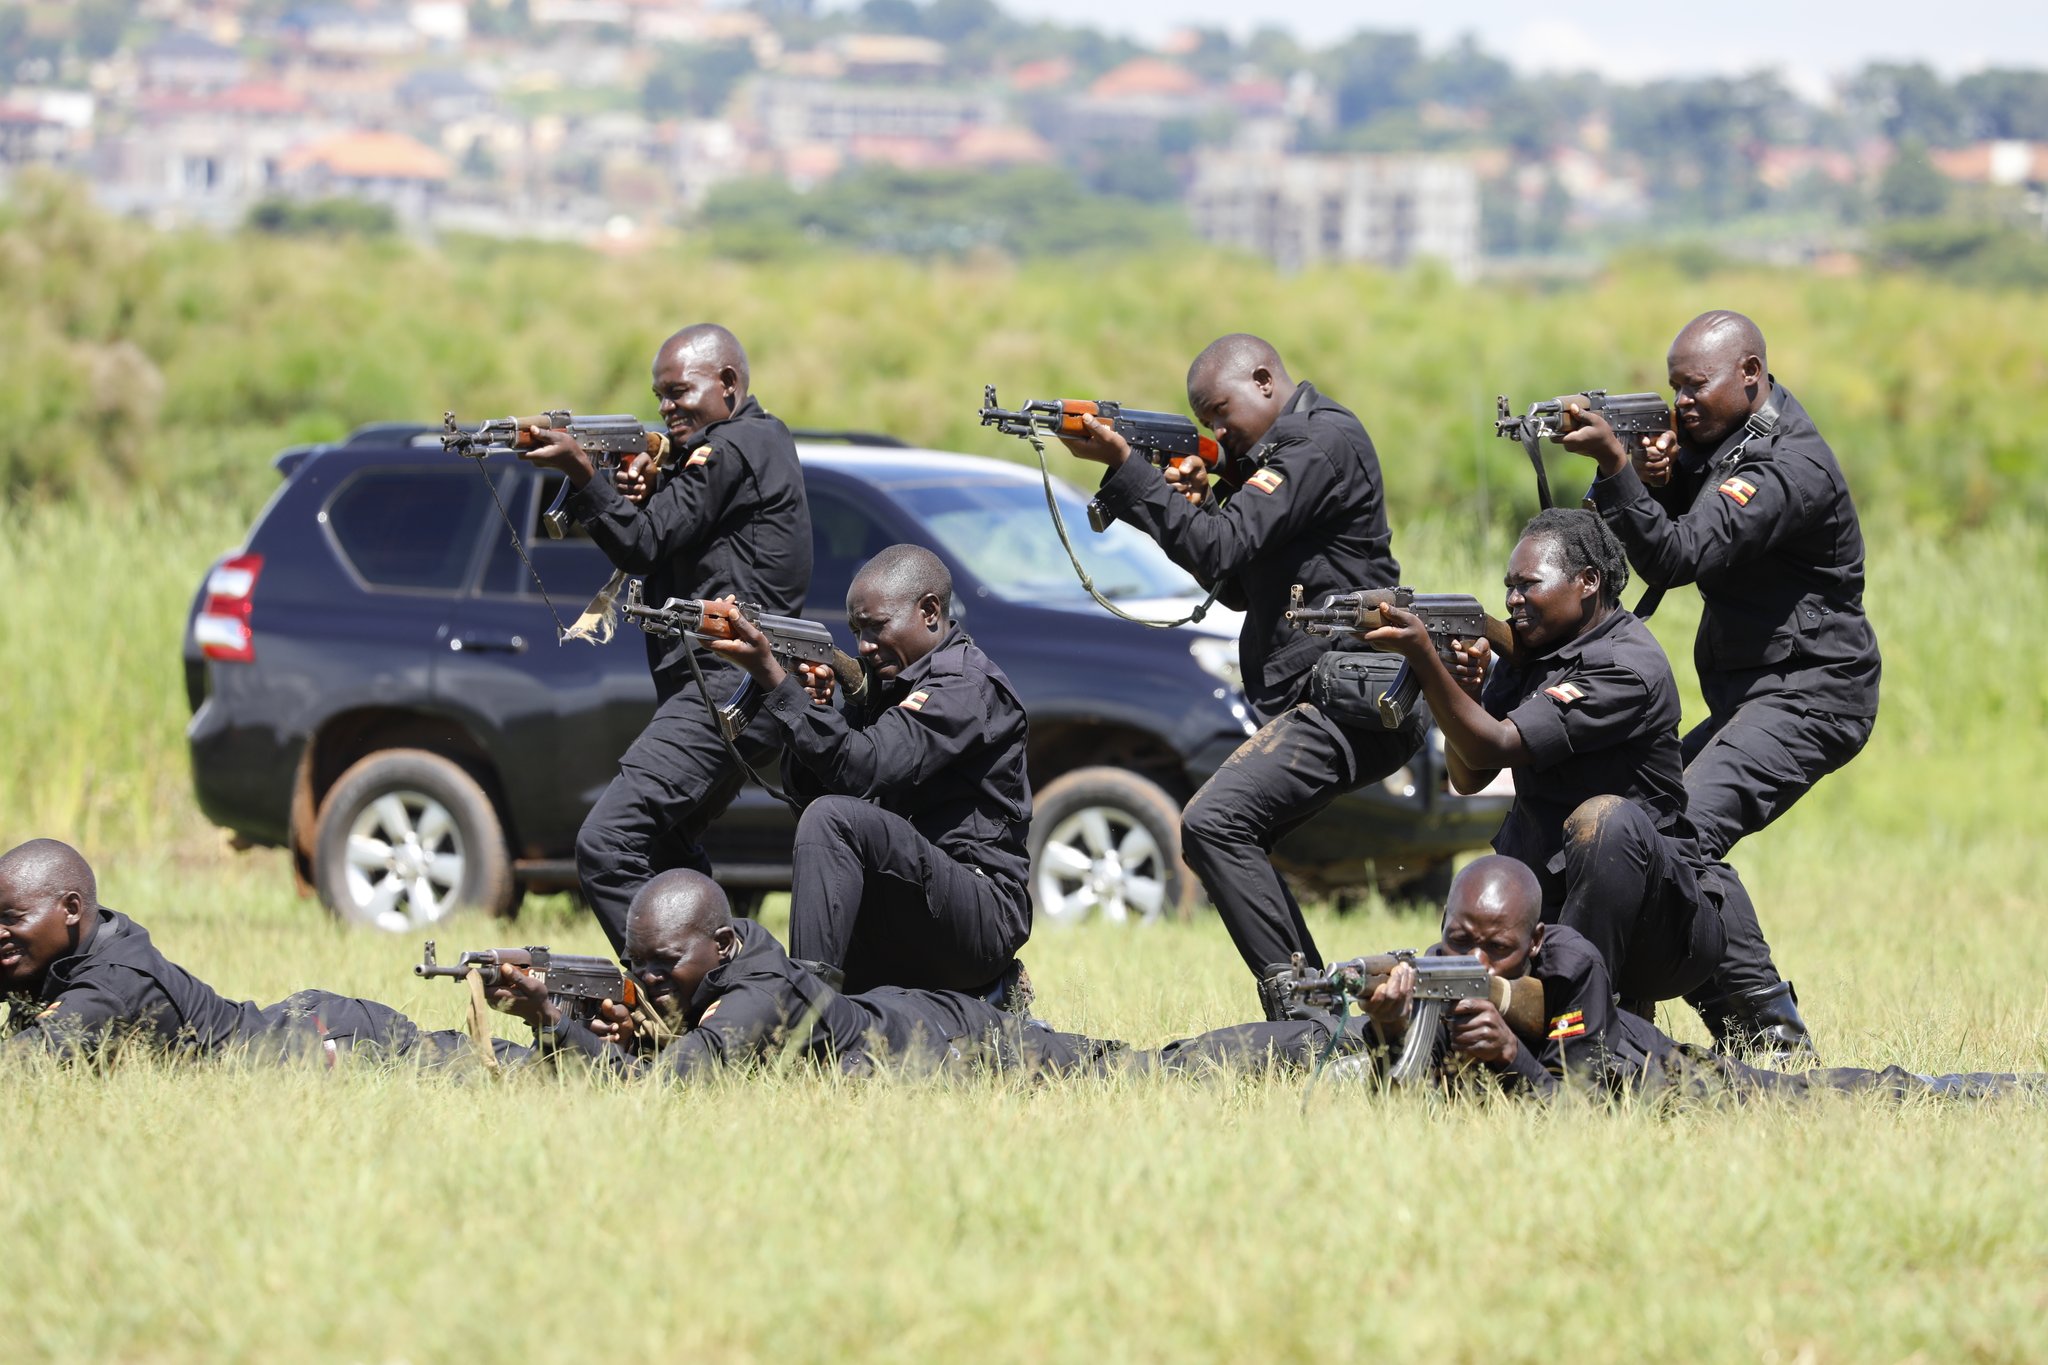  The training encompassed crucial aspects such as VIP/VIS (Very Important Persons and Vital Installation Security) principles, weapon drills, motorcade protocols, and parade drills.